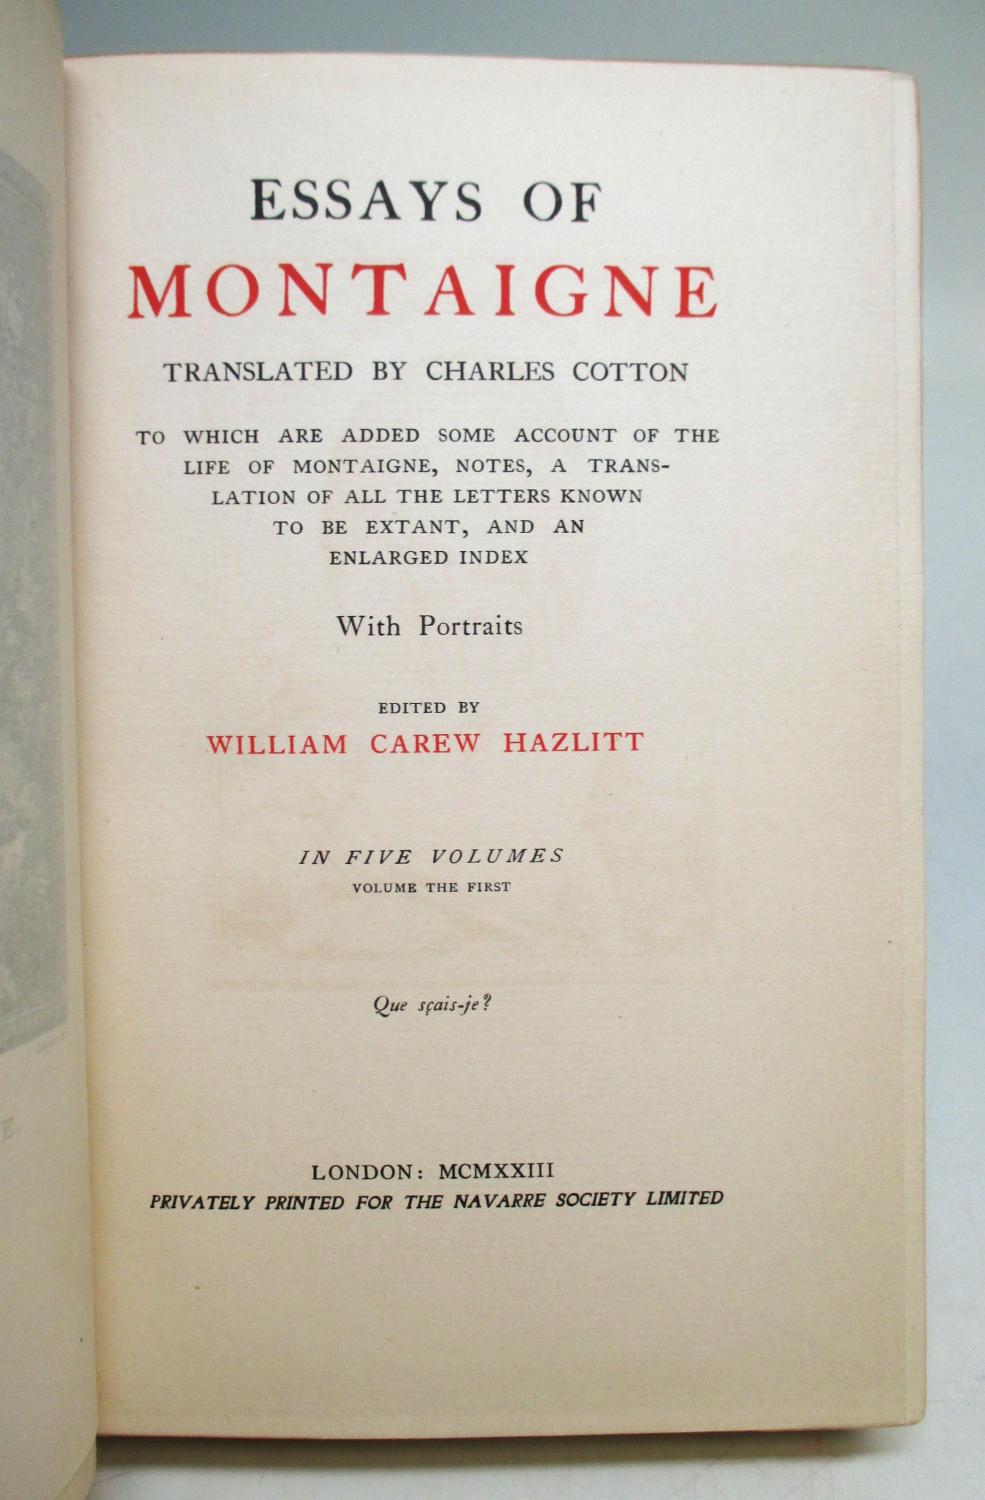 highlight the salient features of the essays of montaigne